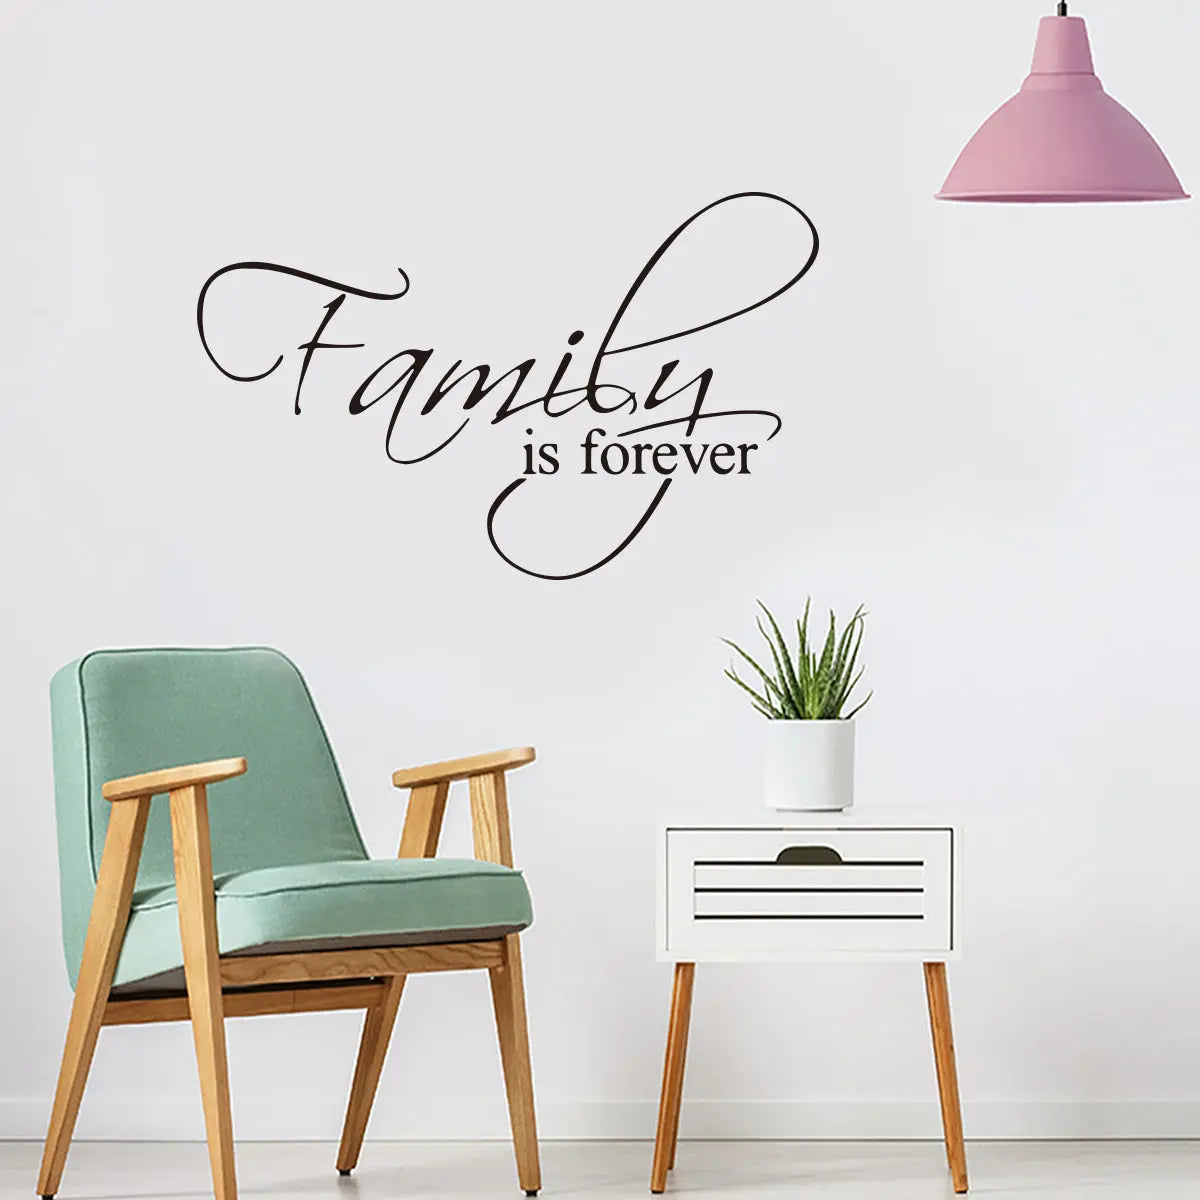 Family is Forever Wall Stickers 